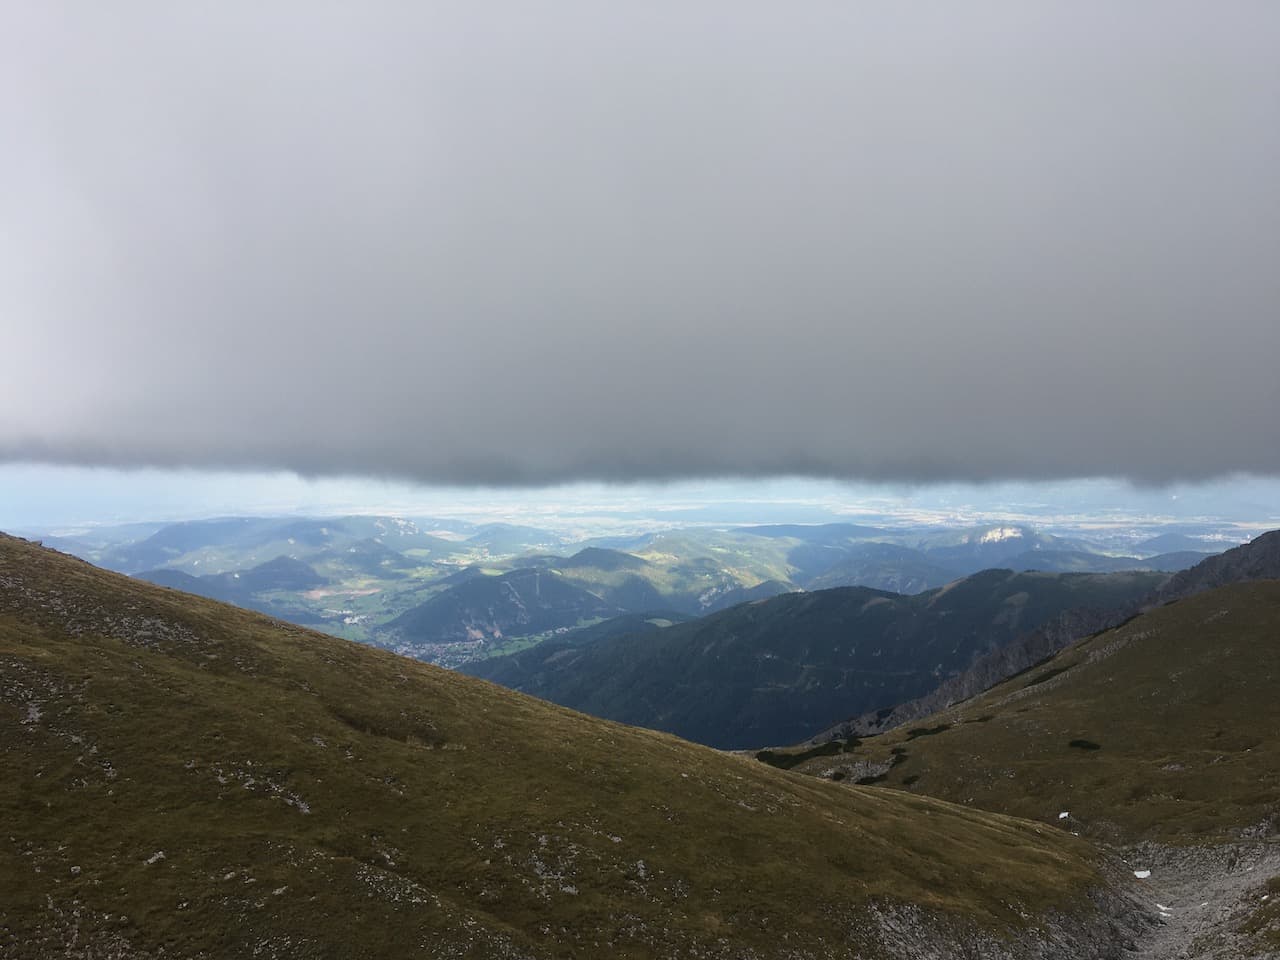 A wall of clouds coming down in a straight horizontal line, stopping shortly before the panoramic view onto the Viennese Hausberge from near the top of Schneeberg